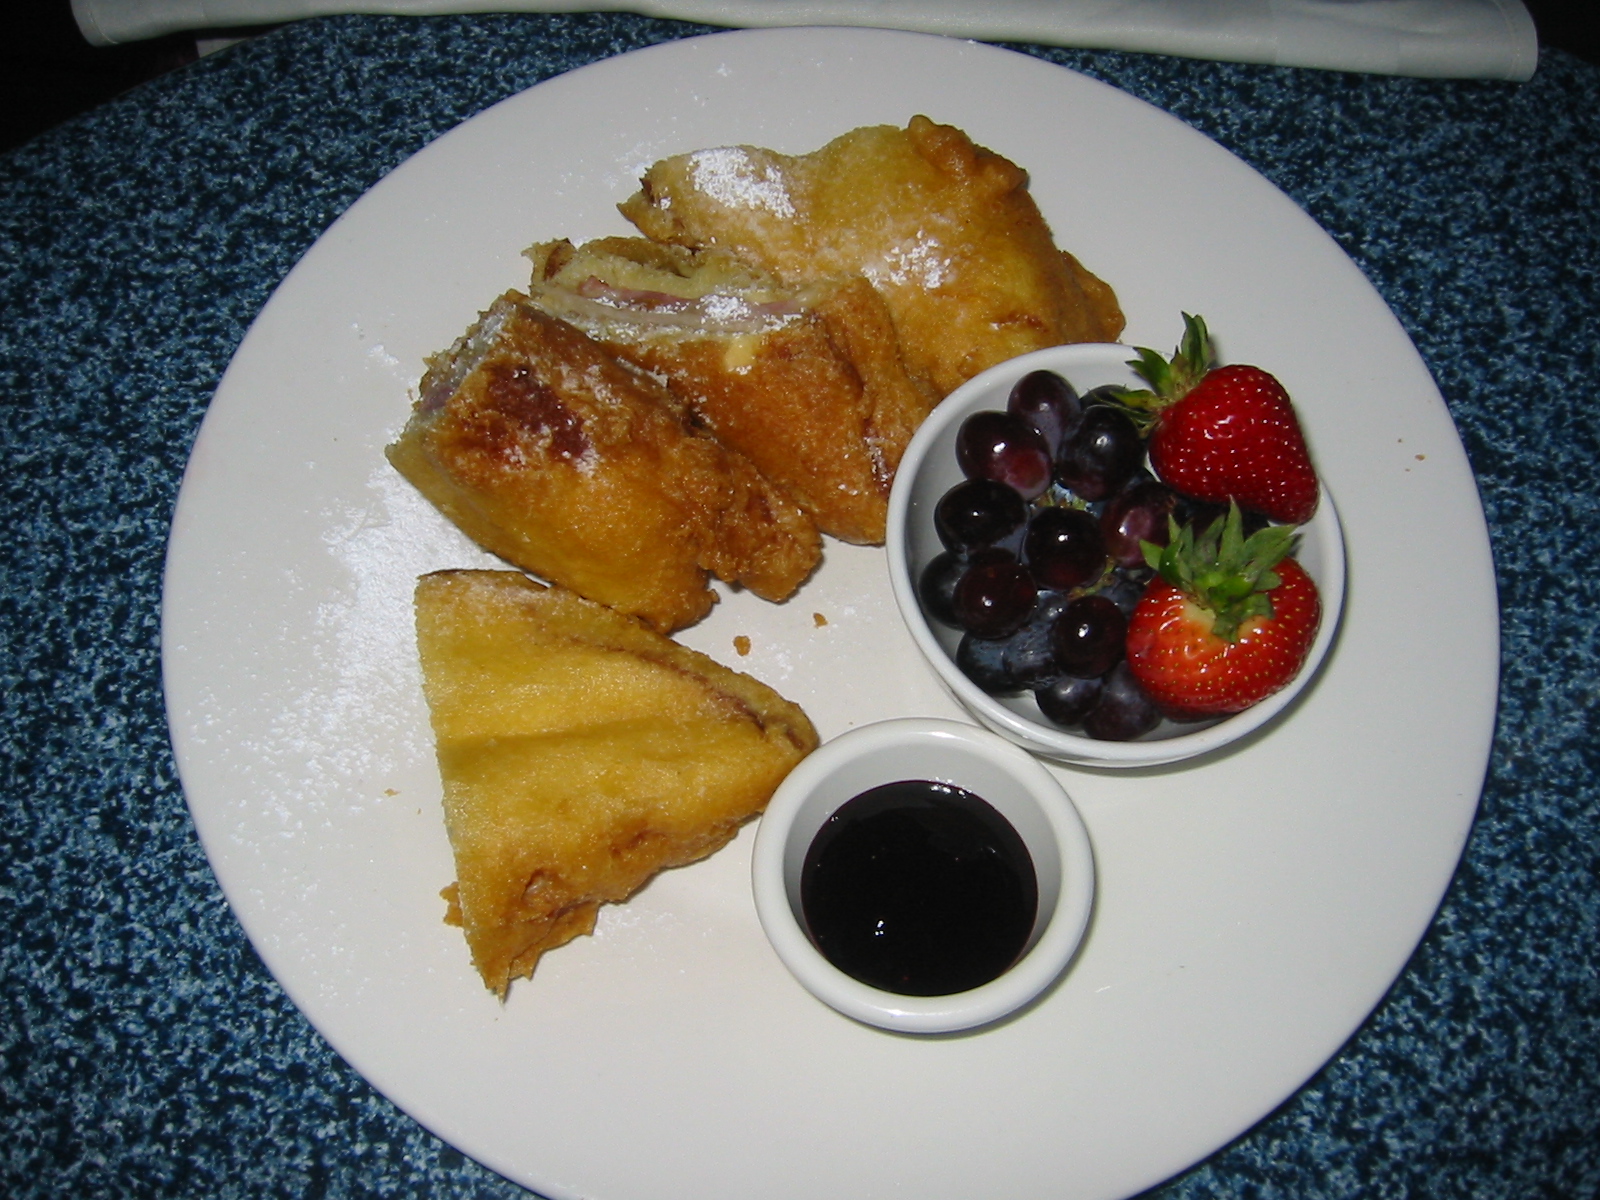 Classic Monte Cristo Sandwich at Cafe Orleans